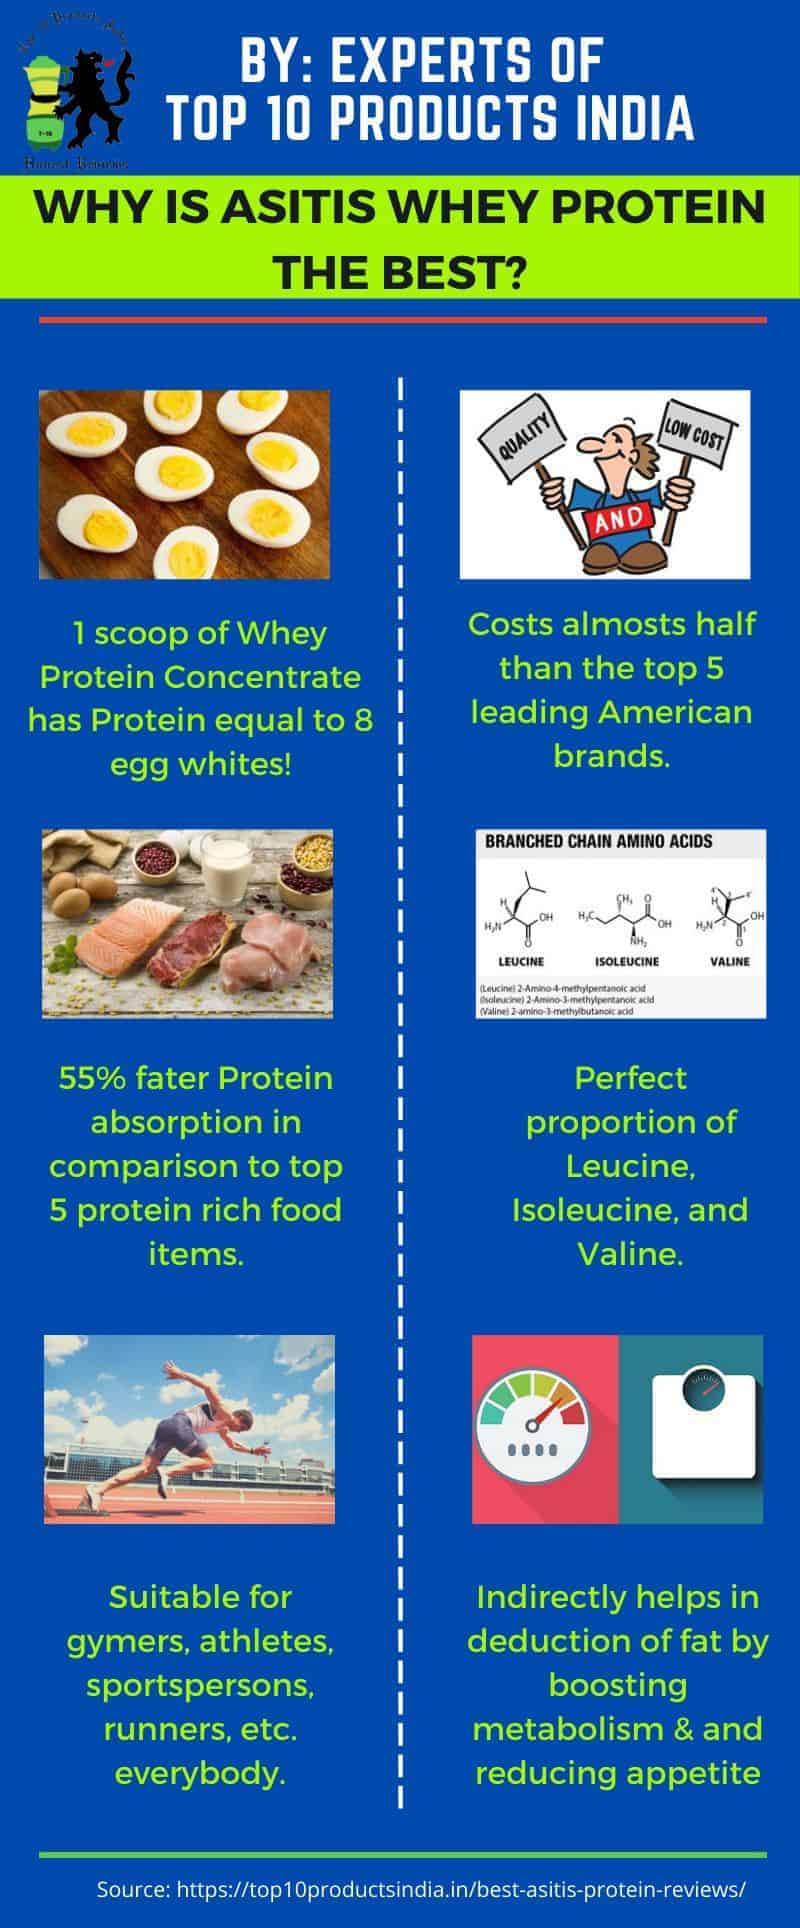 Asitis protein review 